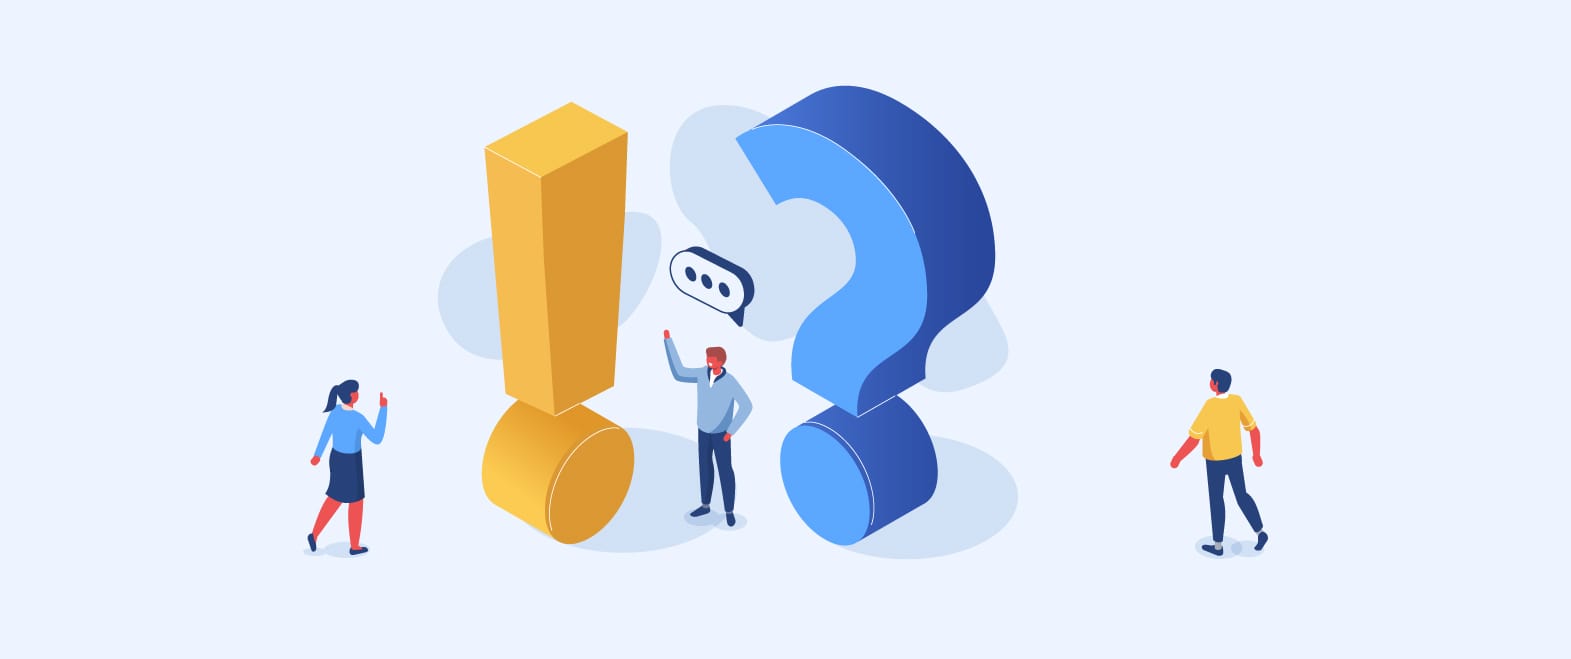 Common web design questions and answers